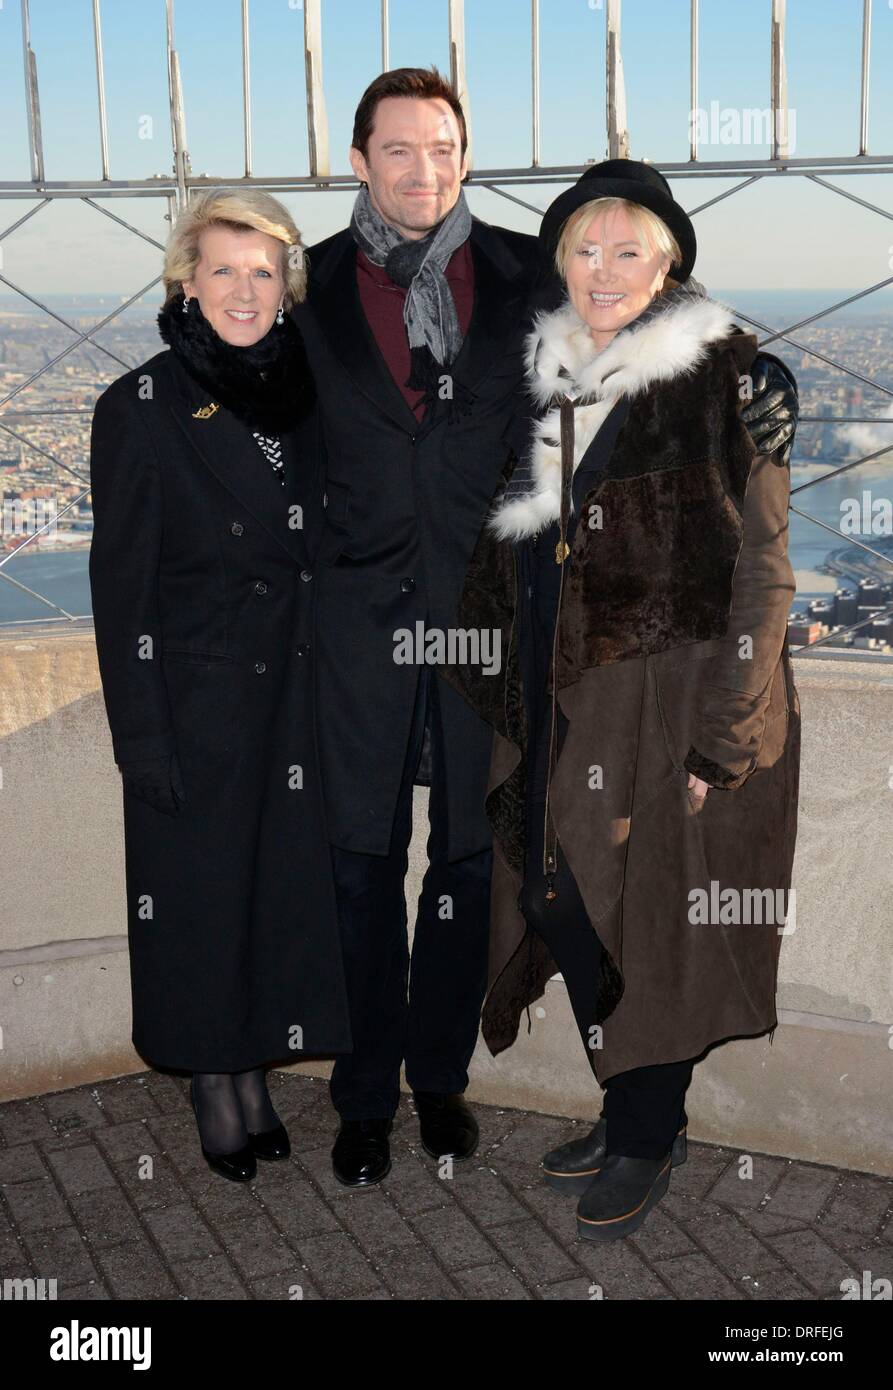 New York, NY, USA. 24th Jan, 2014. Julie Bishop: Australian Minister for Foreign Affairs, Hugh Jackman, Deborra-lee Furness at the press conference for Empire State Building Lighting in Honor of Australia Day, Empire State Building, New York, NY January 24, 2014. Credit:  Derek Storm/Everett Collection/Alamy Live News Stock Photo